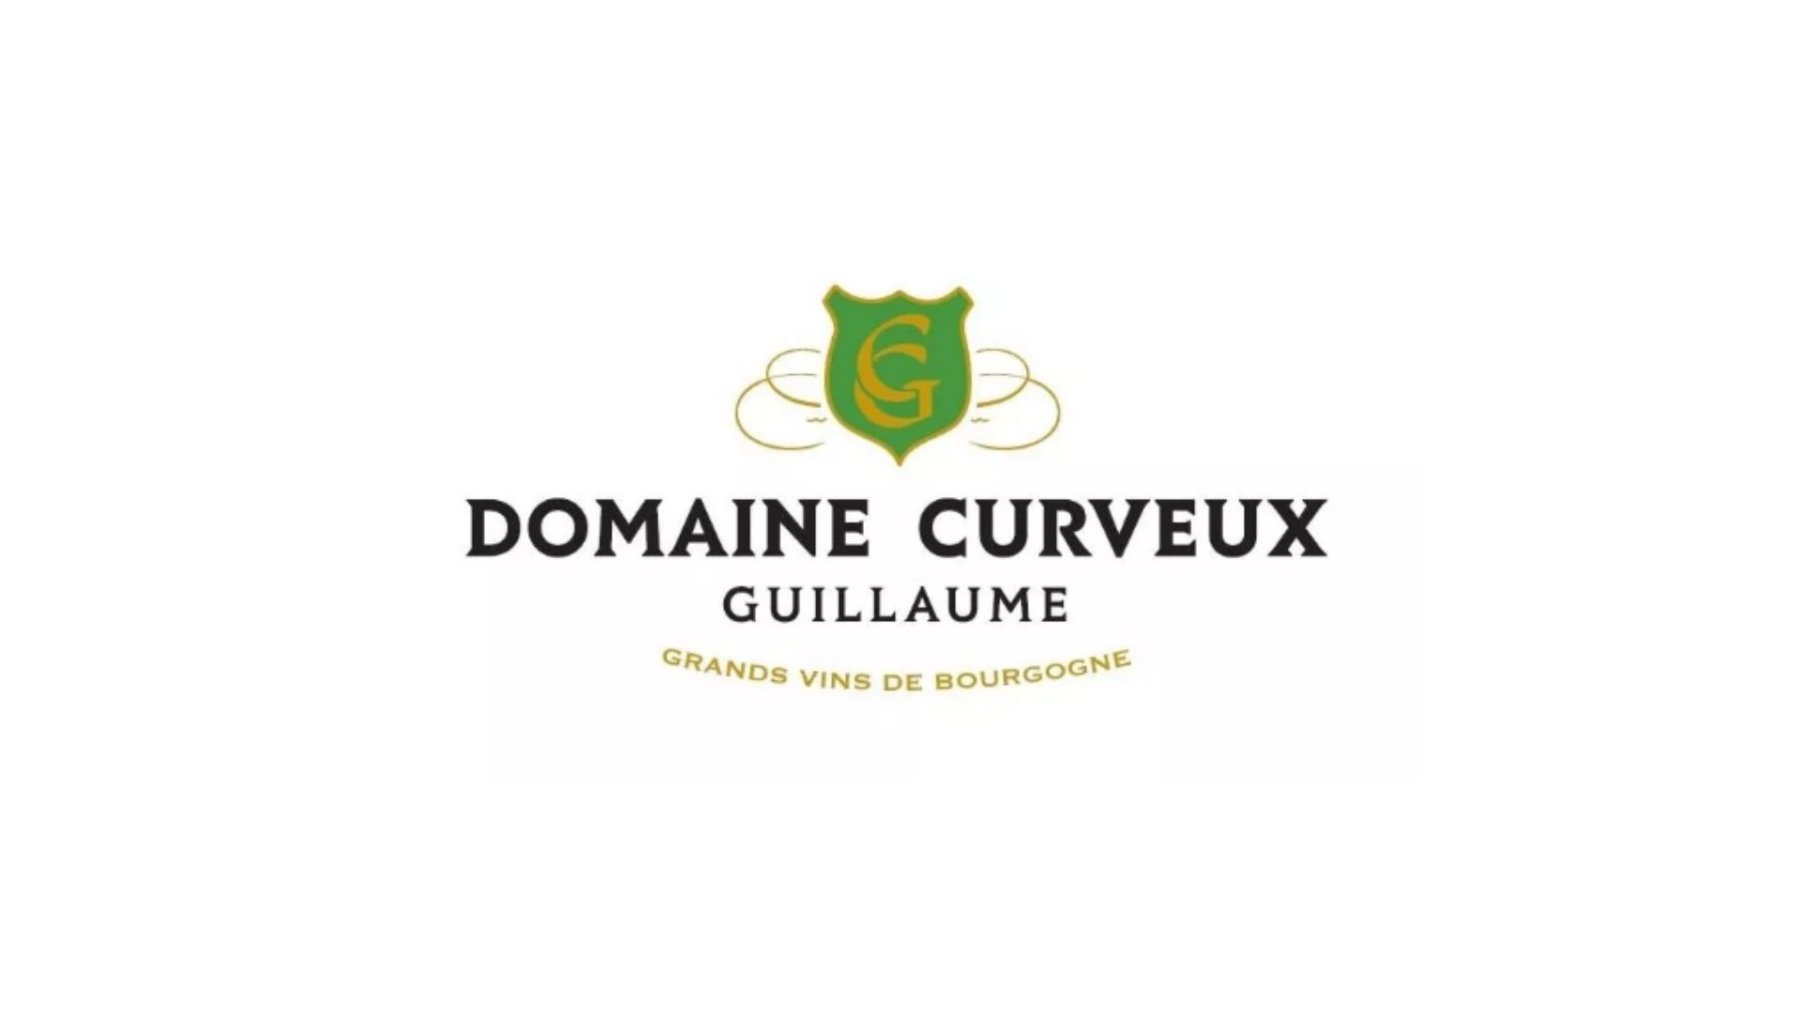 DOMAINE CURVEUX GUILLAUME